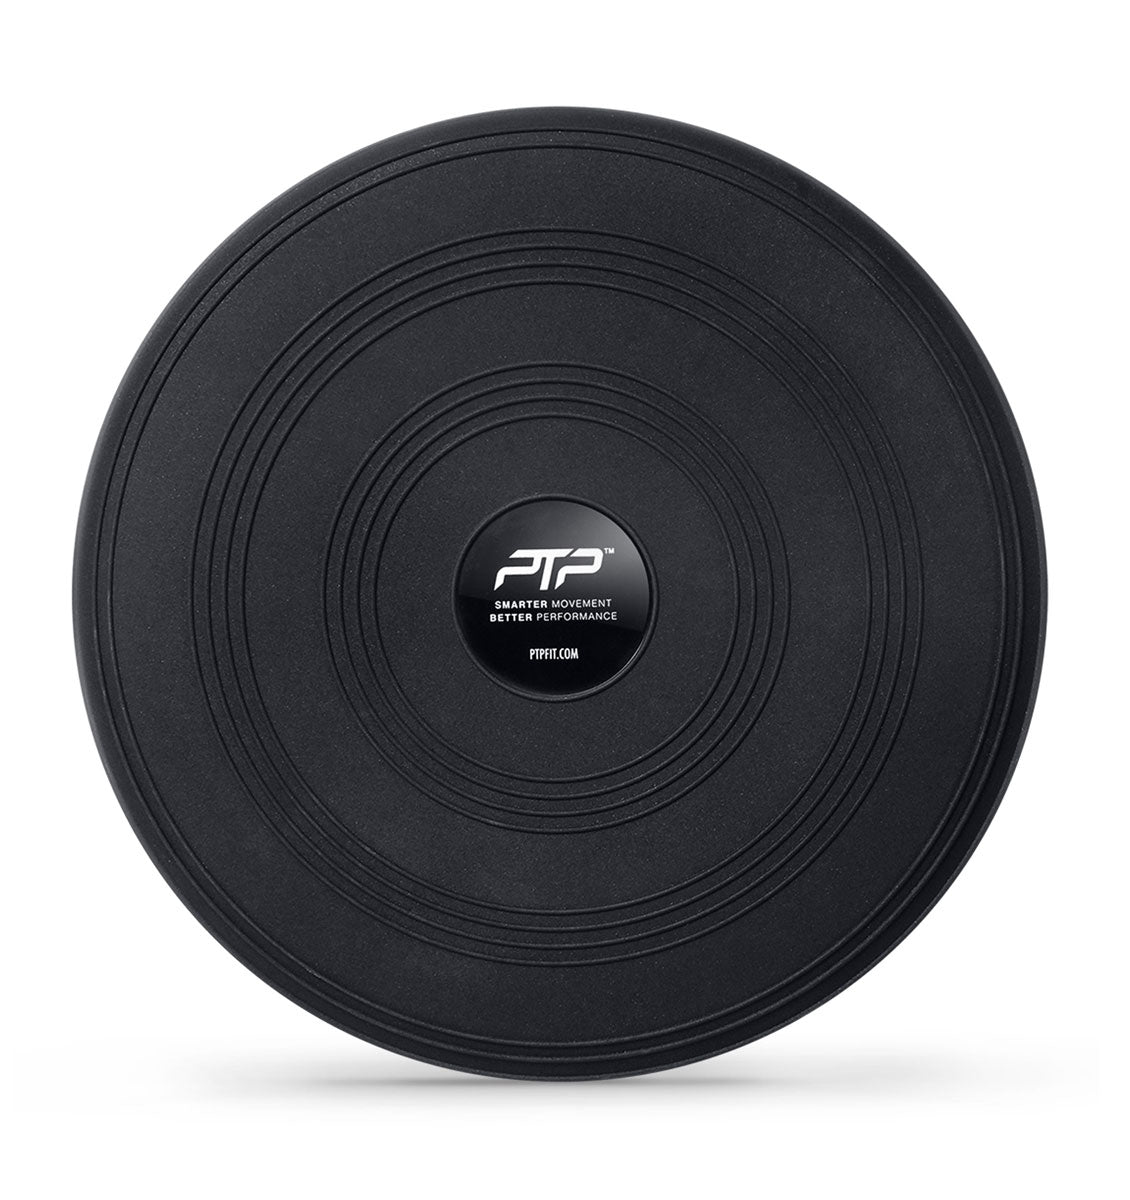 PTP Stability Disc - 4